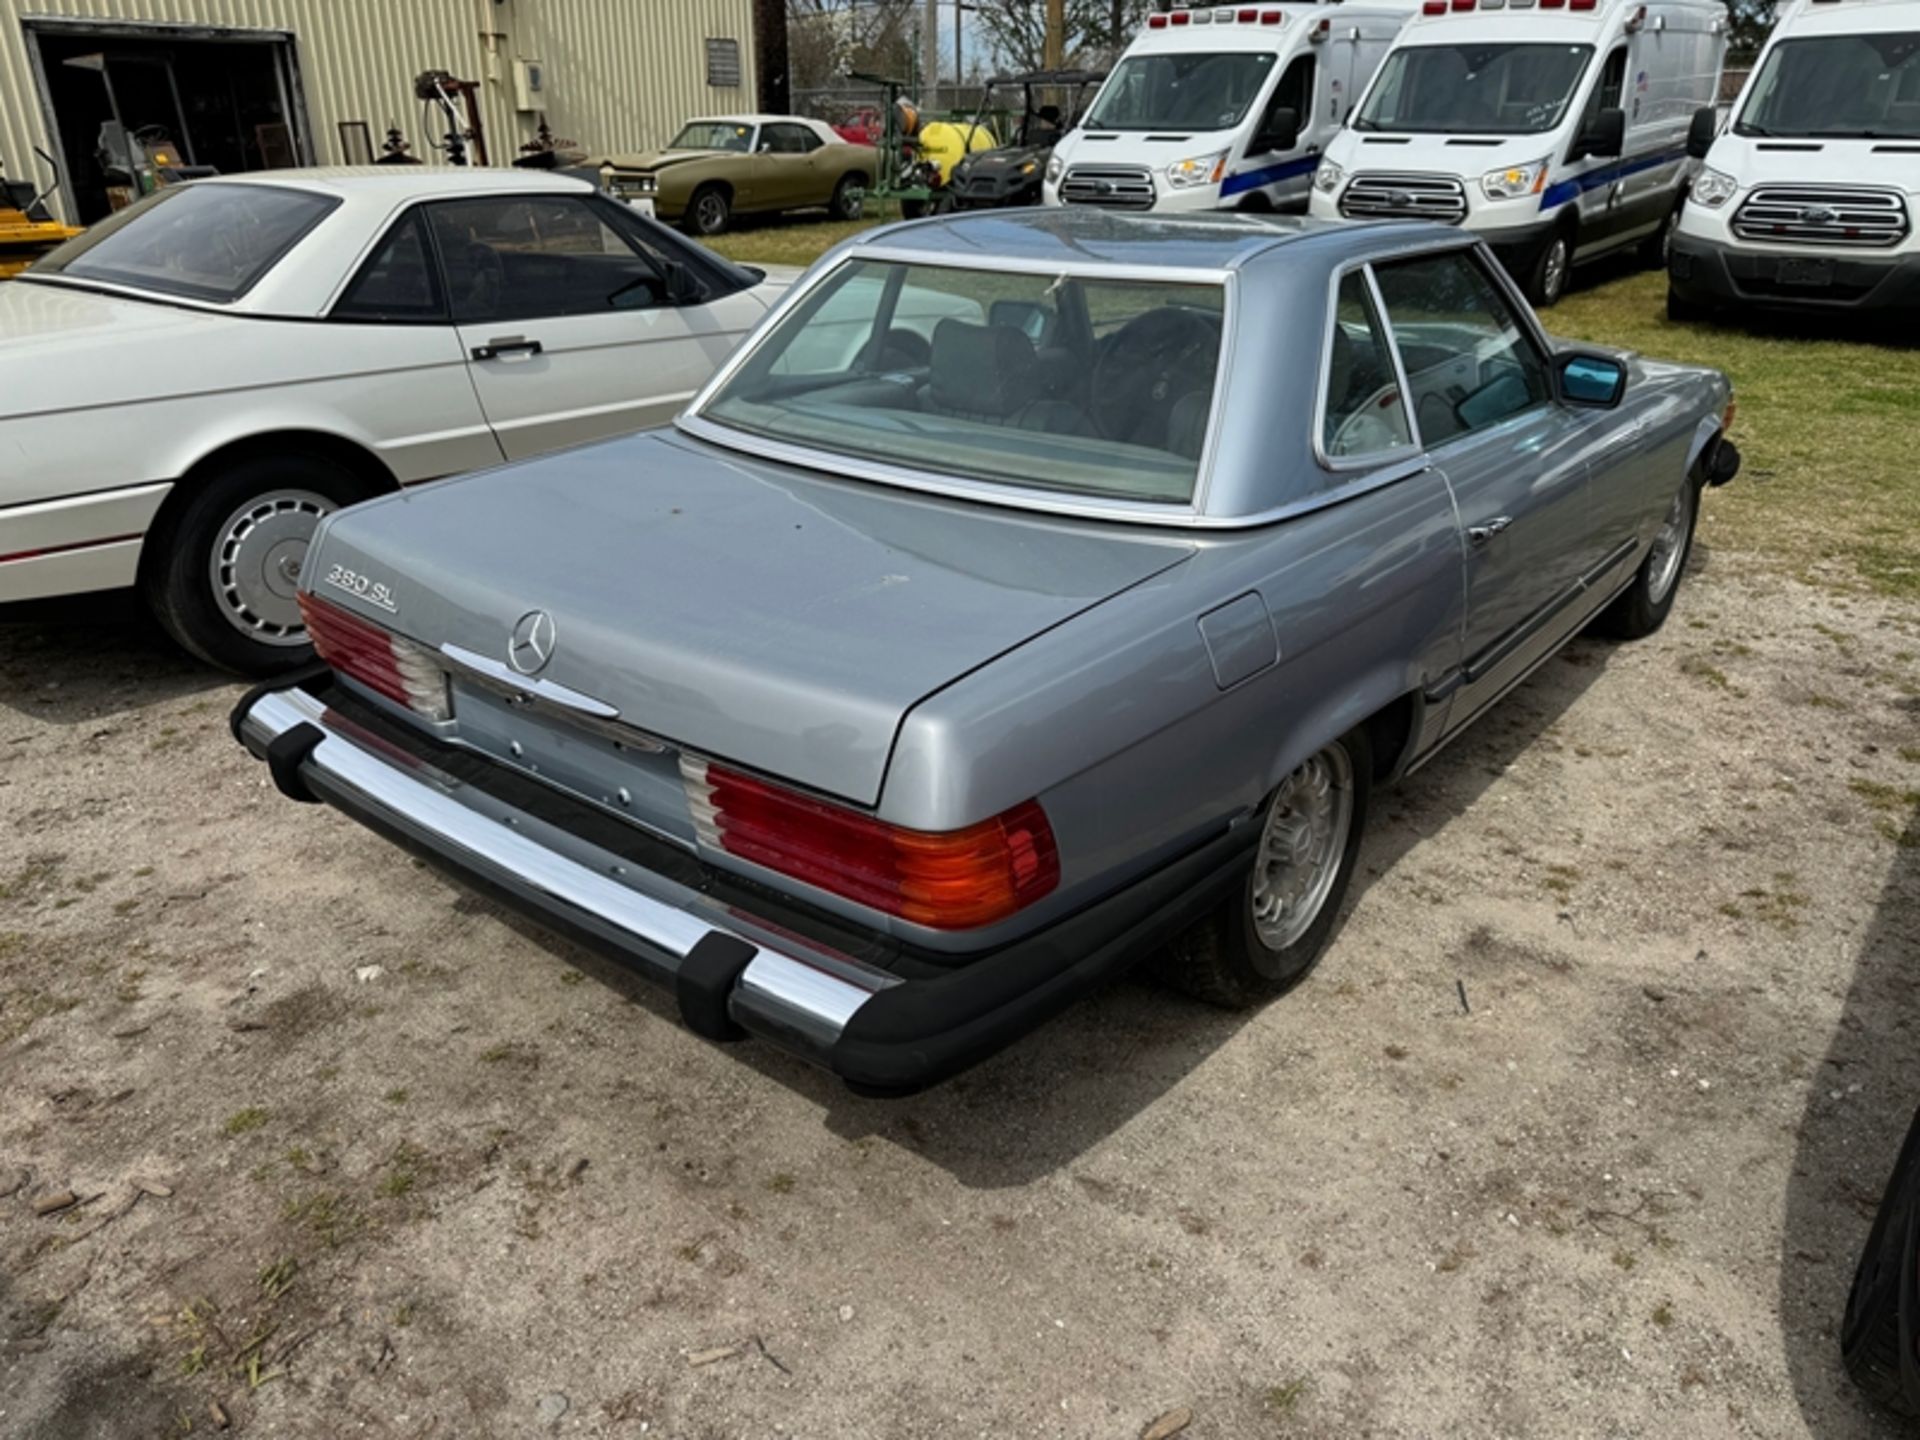 1984 MERCEDES 380SL - 116,262 miles showing - WDBBA45A7EA009891 - Image 3 of 6